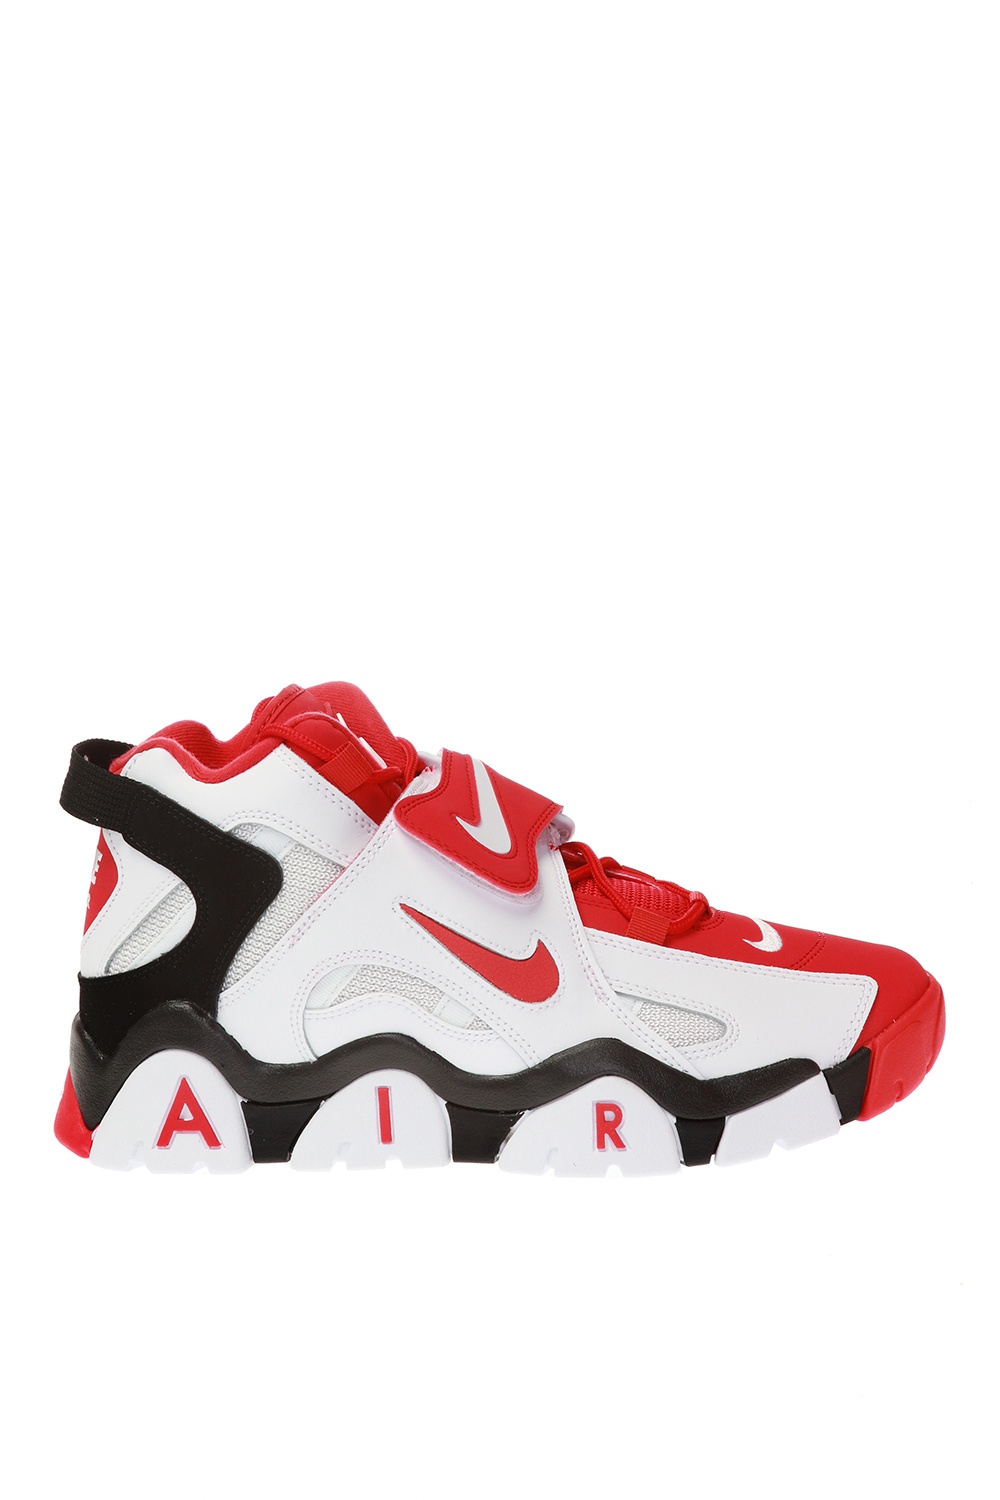 air barrage mid red and white